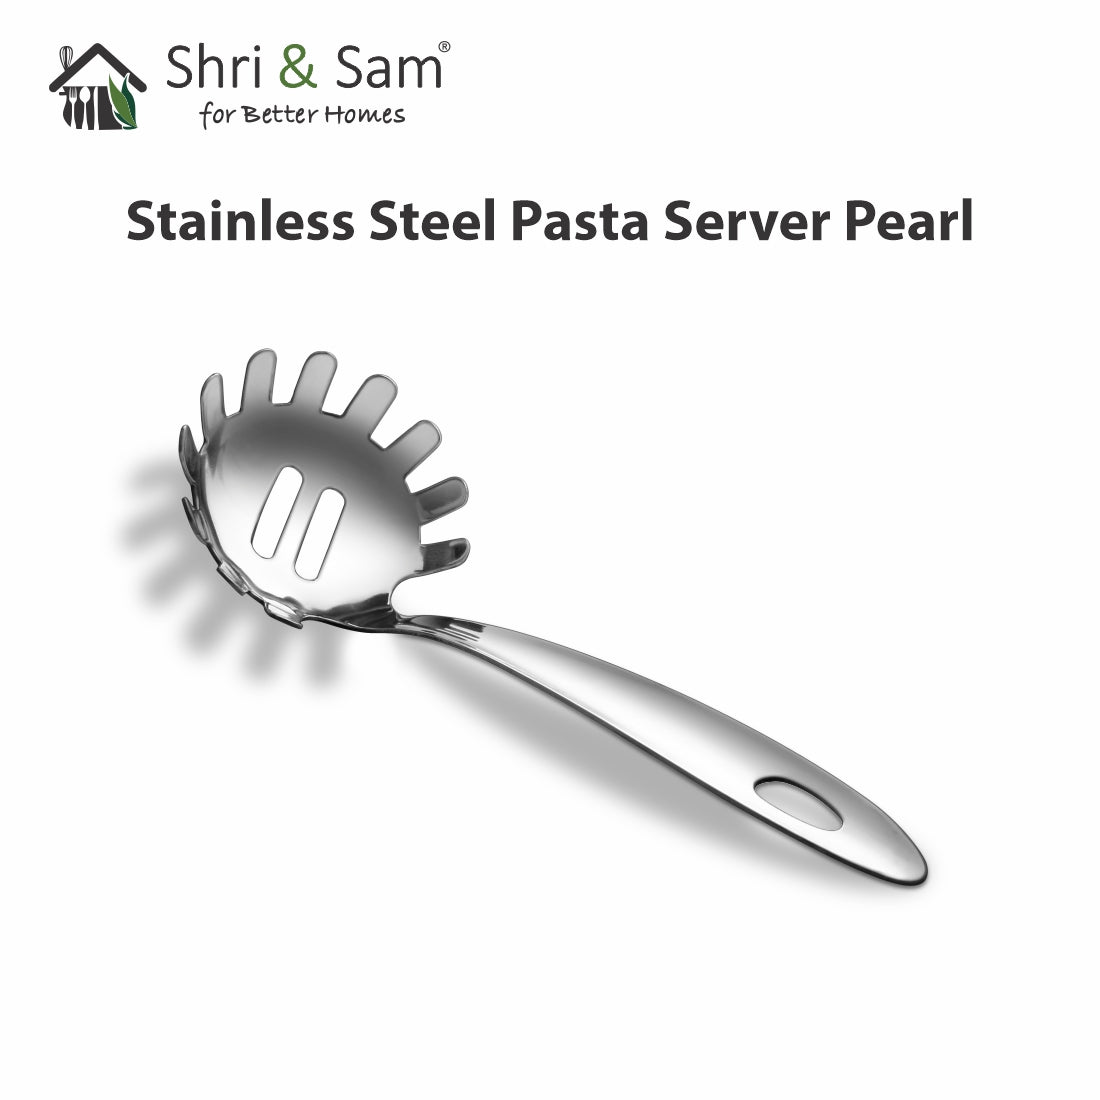 Stainless Steel Pasta Server Pearl